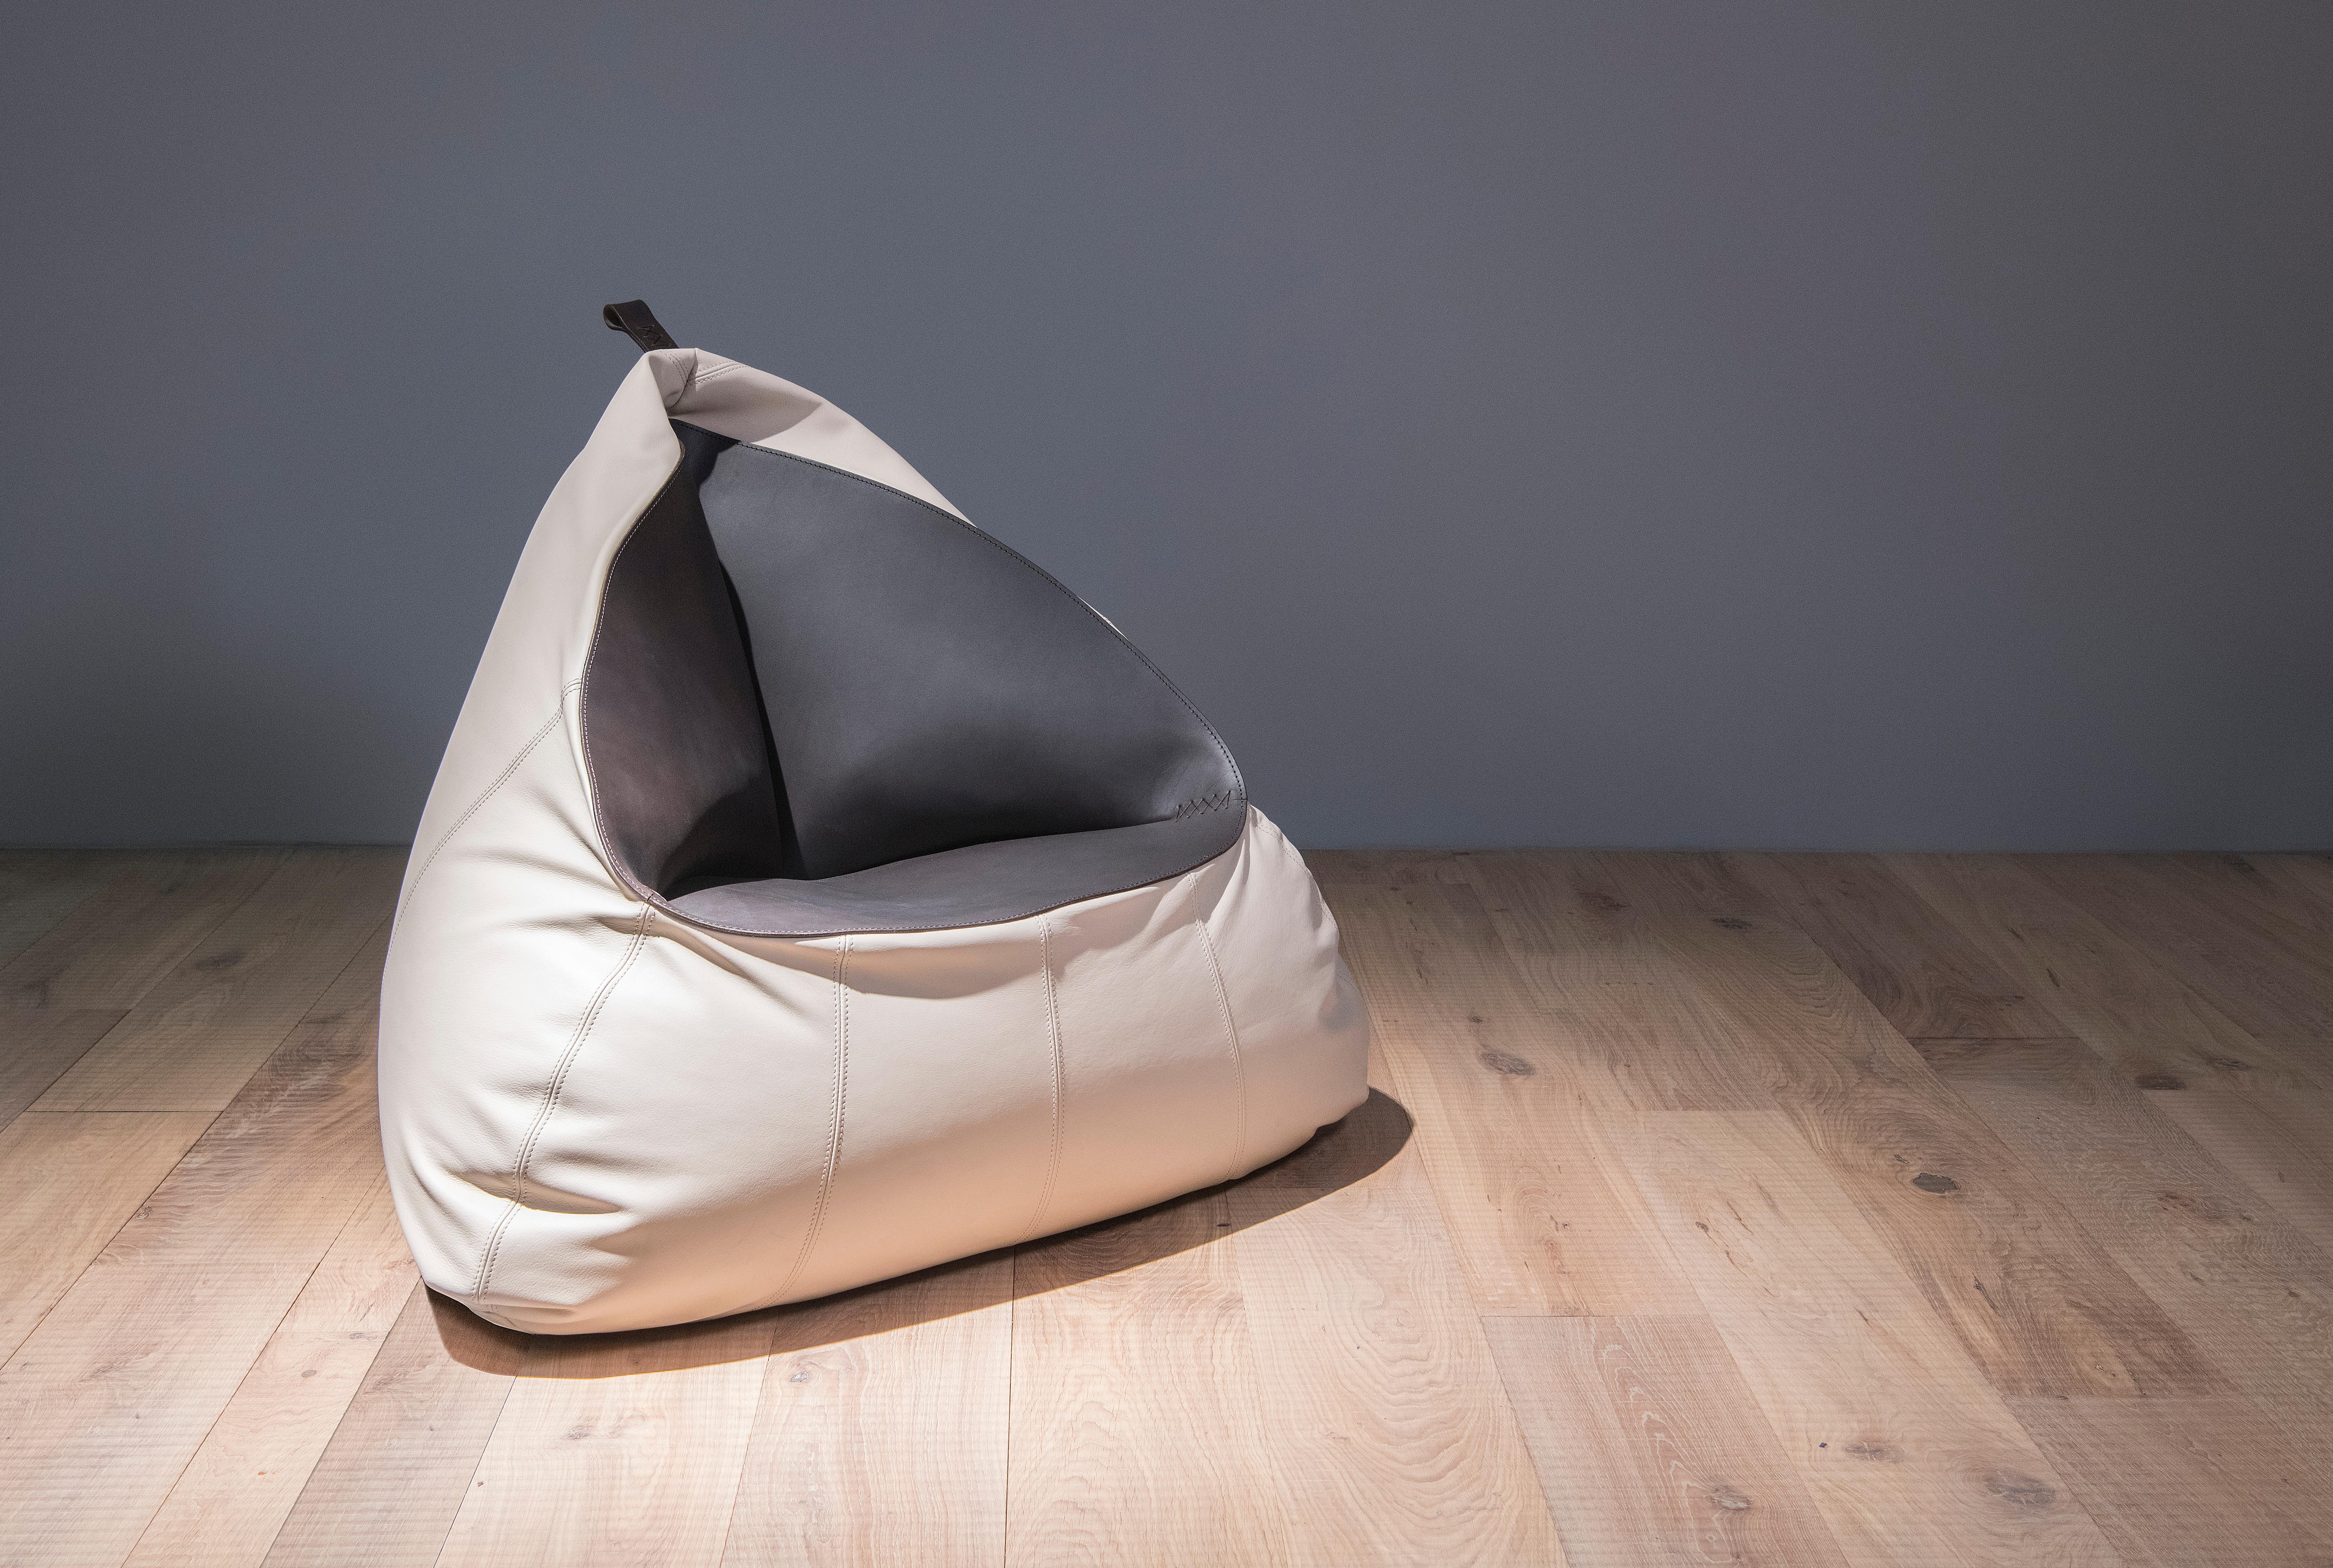 Beanbag chair DS-9090 by De Sede. Beanbags have long been a part of the De Sede inventory, but the manufacture has now gone one step further with the launch of DS-9090, a beanbag that defines sitting itself. A pyramid-shaped insert made of high